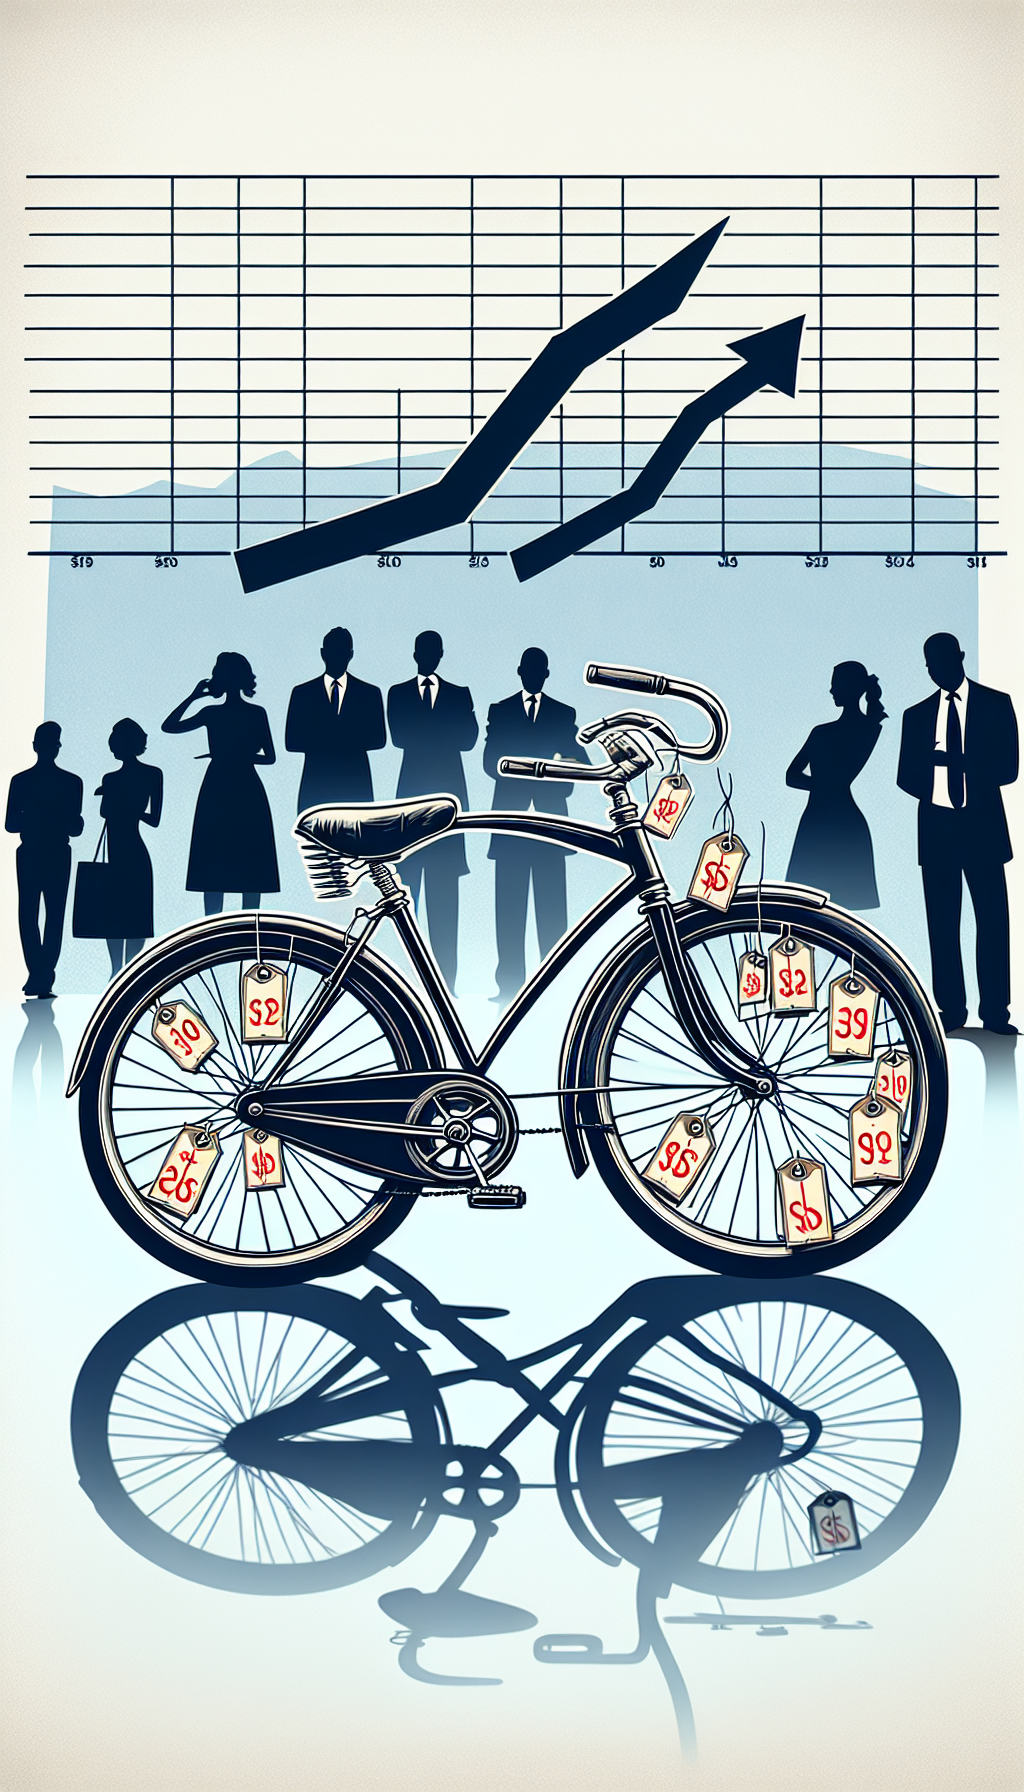 An illustration of a vintage Schwinn bike with an overlay of upward trending graphs and dollar signs emblazoning the wheels. Above the handlebars, classic price tags dangle, each displaying different values, while in the background, stylized silhouettes of people bid in an auction-like setting, symbolizing the market interest. The bike casts a shadow shaped like an up arrow, hinting at increasing value.